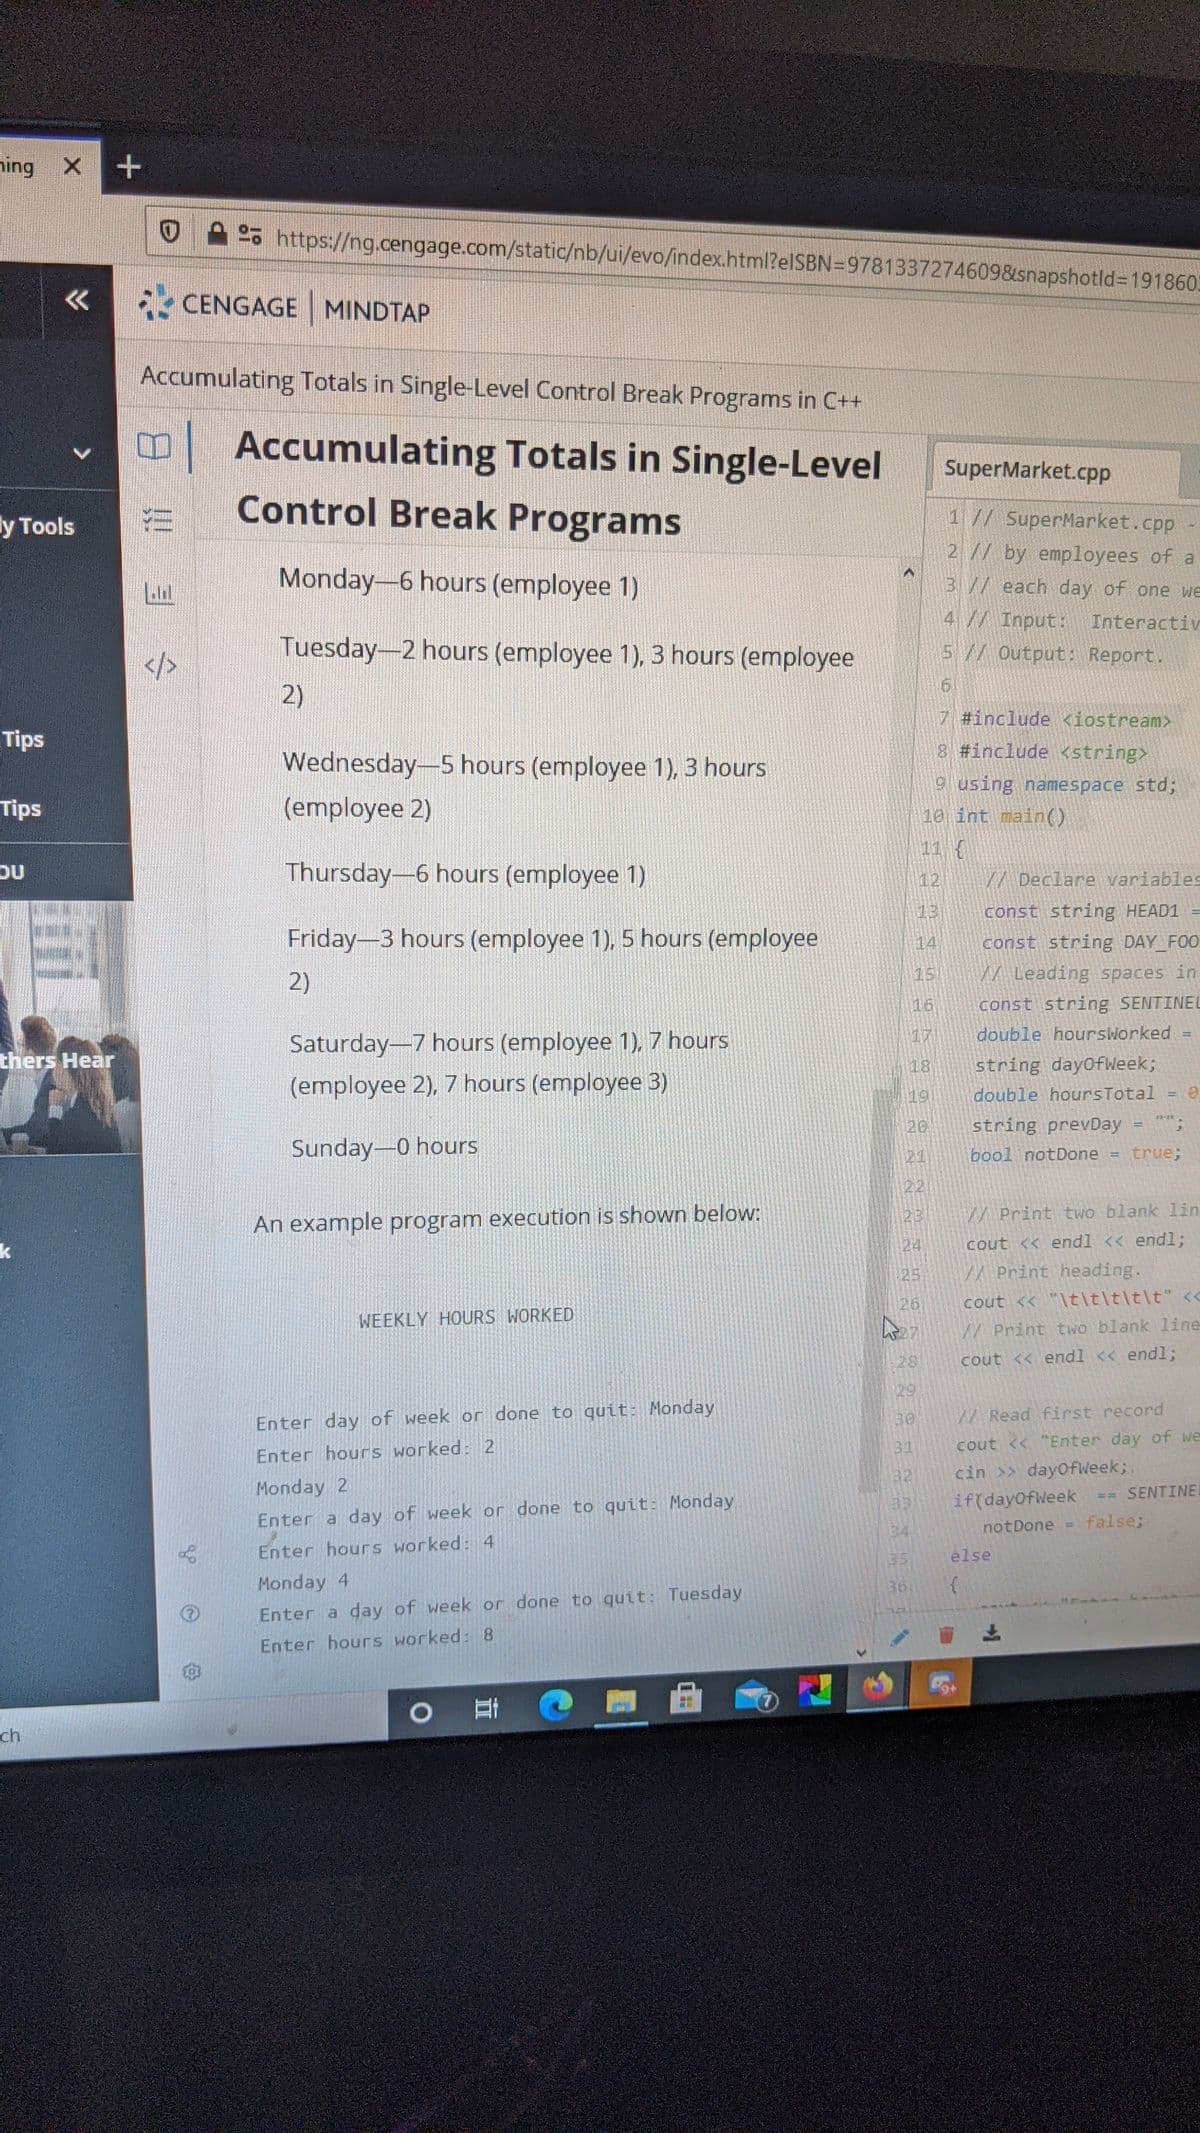 ning X
o https://ng.cengage.com/static/nb/ui/evo/index.html?elSBN=9781337274609&snapshotld%3D191860.
CENGAGE MINDTAP
Accumulating Totals in Single-Level Control Break Programs in C++
日1
Accumulating Totals in Single-Level
SuperMarket.cpp
Control Break Programs
1 // SuperMarket.cpp
2 // by employees of a
у Тools
Monday-6 hours (employee 1)
3// each day of one we
4 // Input: Interactiv
5 // Output: Report.
Tuesday-2 hours (employee 1), 3 hours (employee
2)
#include <iostream>
Tips
8 #include <string>
Wednesday-5 hours (employee 1), 3 hours
9 using namespace std;
10 int main()
Tips
(employee 2)
11 {
OU
Thursday-6 hours (employee 1)
12
W Declare variables
const string HEAD1
Friday-3 hours (employee 1), 5 hours (employee
14
const string DAY FOO
2)
15
W Leading spaces in
const string SENTINEL
double hoursWorked
16
17
Saturday-7 hours (employee 1), 7 hours
thers Hear
string dayofWeek;
double hoursTotal
18
(employee 2), 7 hours (employee 3)
19
20
string prevDay
!!
Sunday-0 hours
bool notDone
true;
21
!!
22
23
W Print two blank 1in
An example program execution is shown below:
k
24
cout << endl << endl;
25
W Print heading.
cout << "\t\t\t\t\t" <<
A Print two blank line
26
WEEKLY HOURS WORKED
28
cout << endl << endl;
29
Enter day of week or done to quit: Monday
130
A Read first record
31
cout << "Enter day of we
Enter hours worked: 2
cin >> dayofWeek;.
if(dayOfWeek
32
Monday 2
SENTINEL
Enter a day of week or done to quit: Monday
false;
34
notDone
Enter hours worked: 4
else
35
Monday 4
36
Enter a day of week or done to quit: Tuesday
上
Enter hours worked: 8
ch
